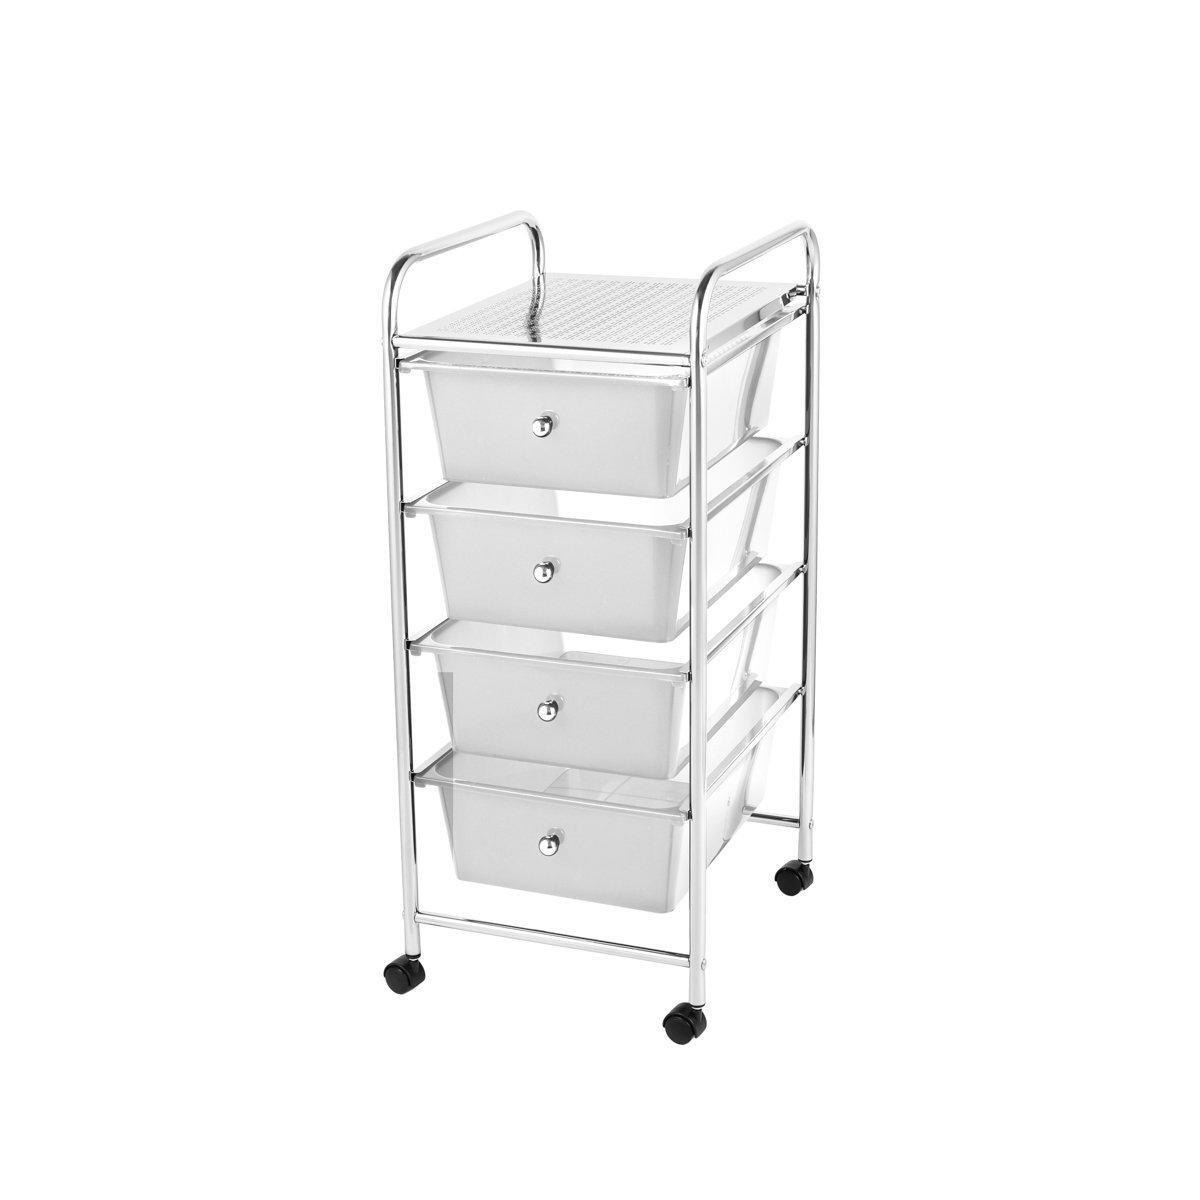 Storage Trolley On Wheels, 4 Drawer Storage Unit For Salon, Beauty Make Up, Home Office Organiser - image 1